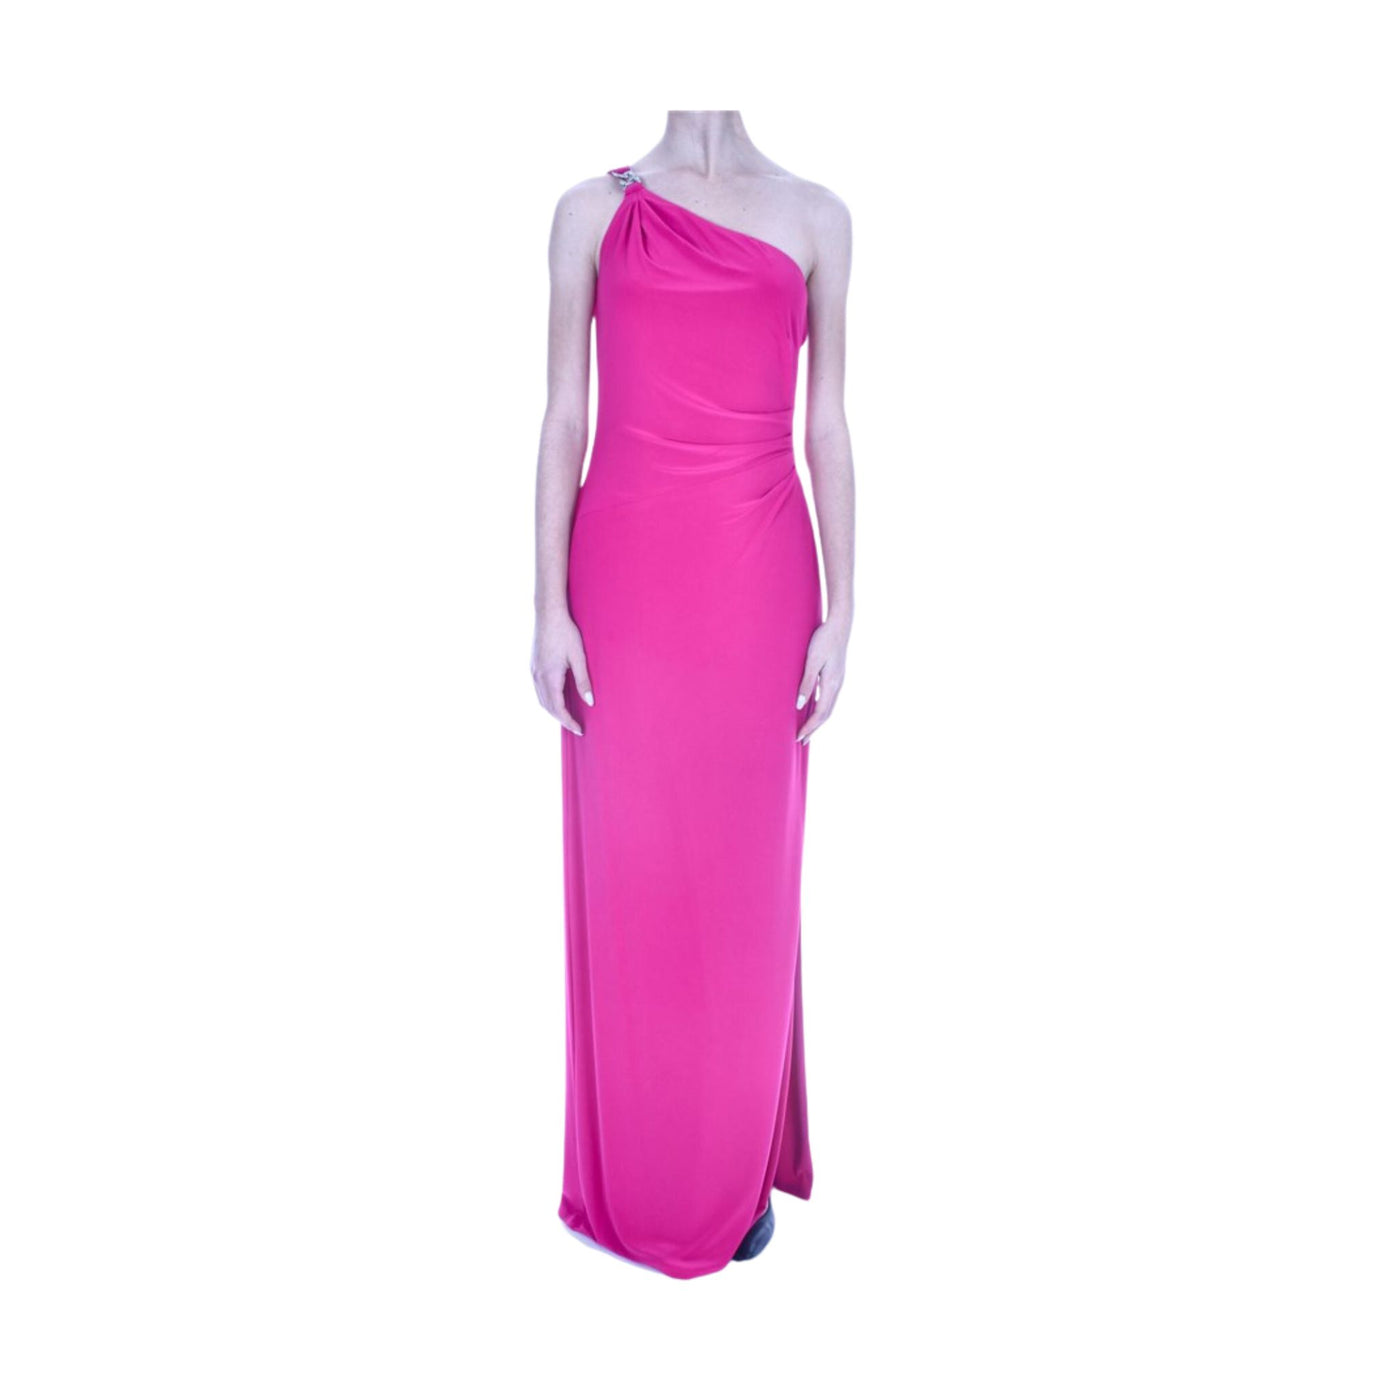 Women's one-shoulder fitted dress